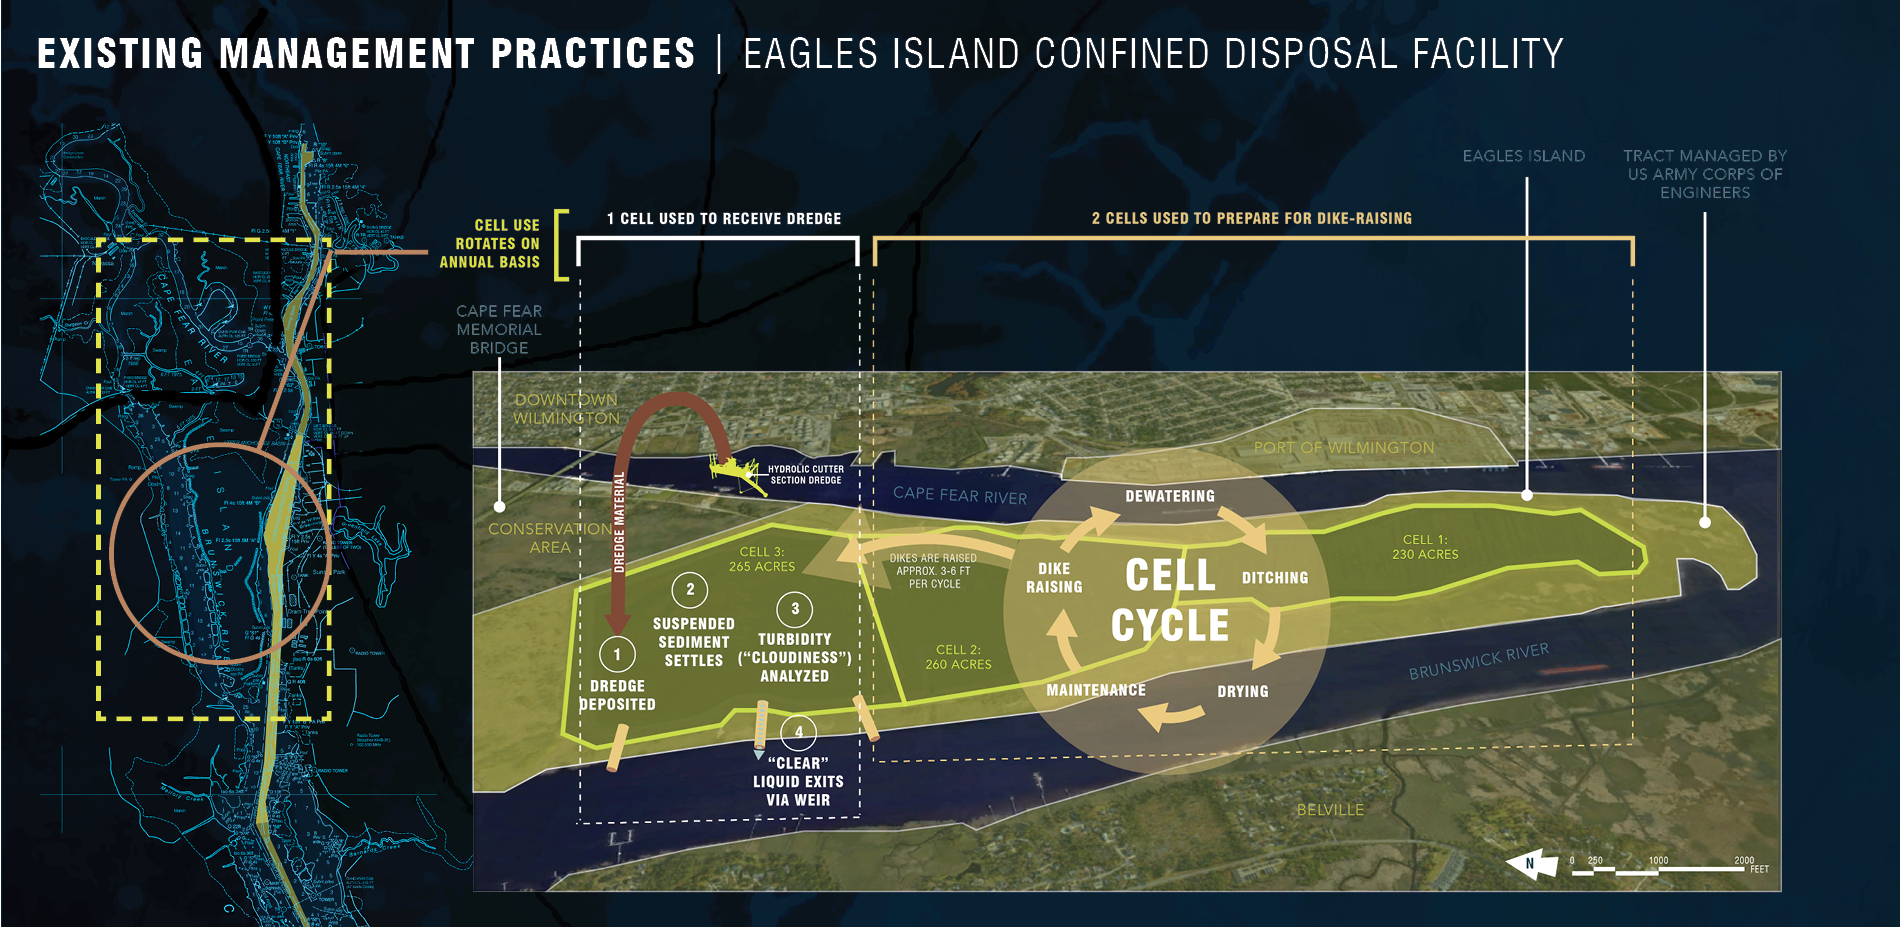 Existing Dredged Material Management Practices on Eagles Island